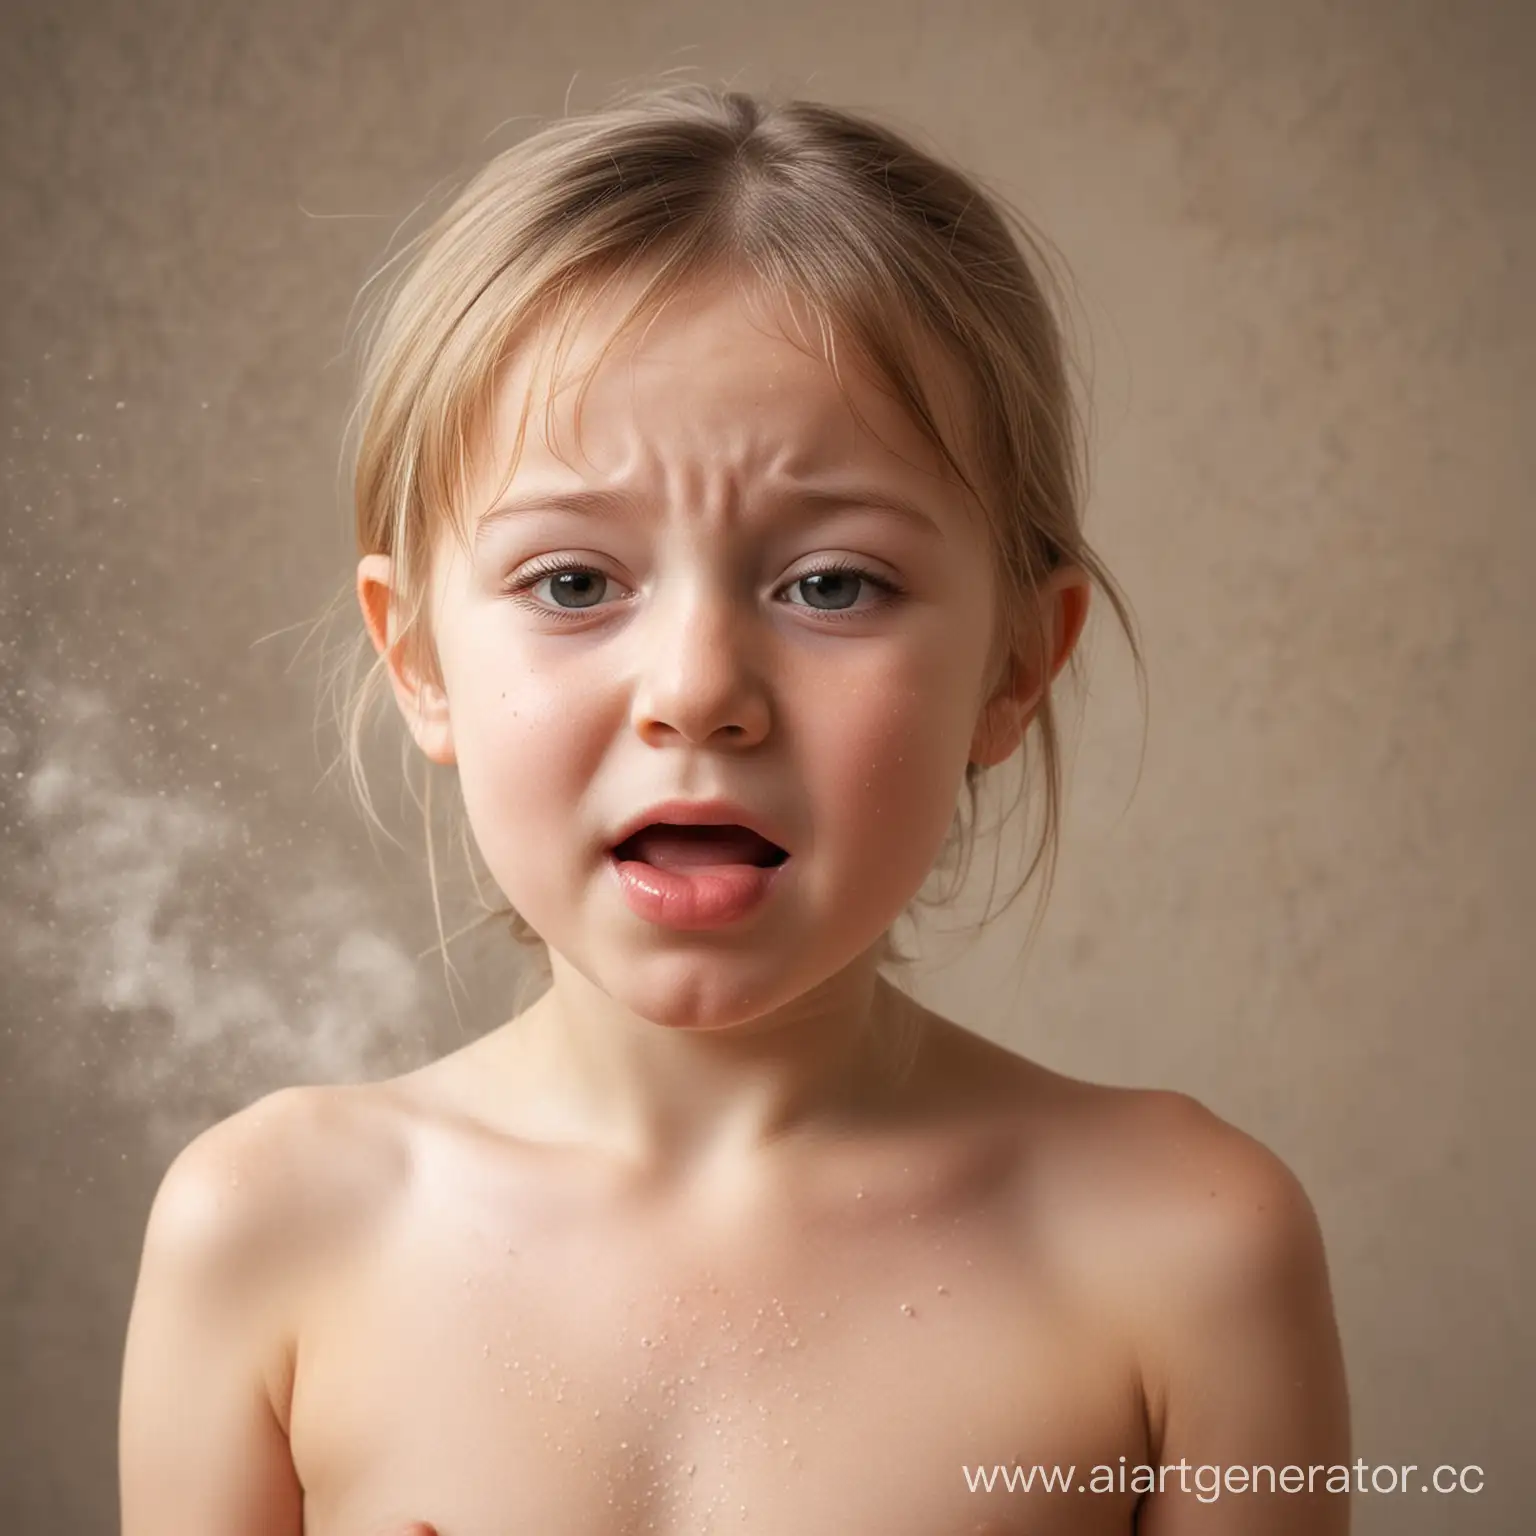 Child-with-Dust-Allergy-Reaction-Distressed-Expression